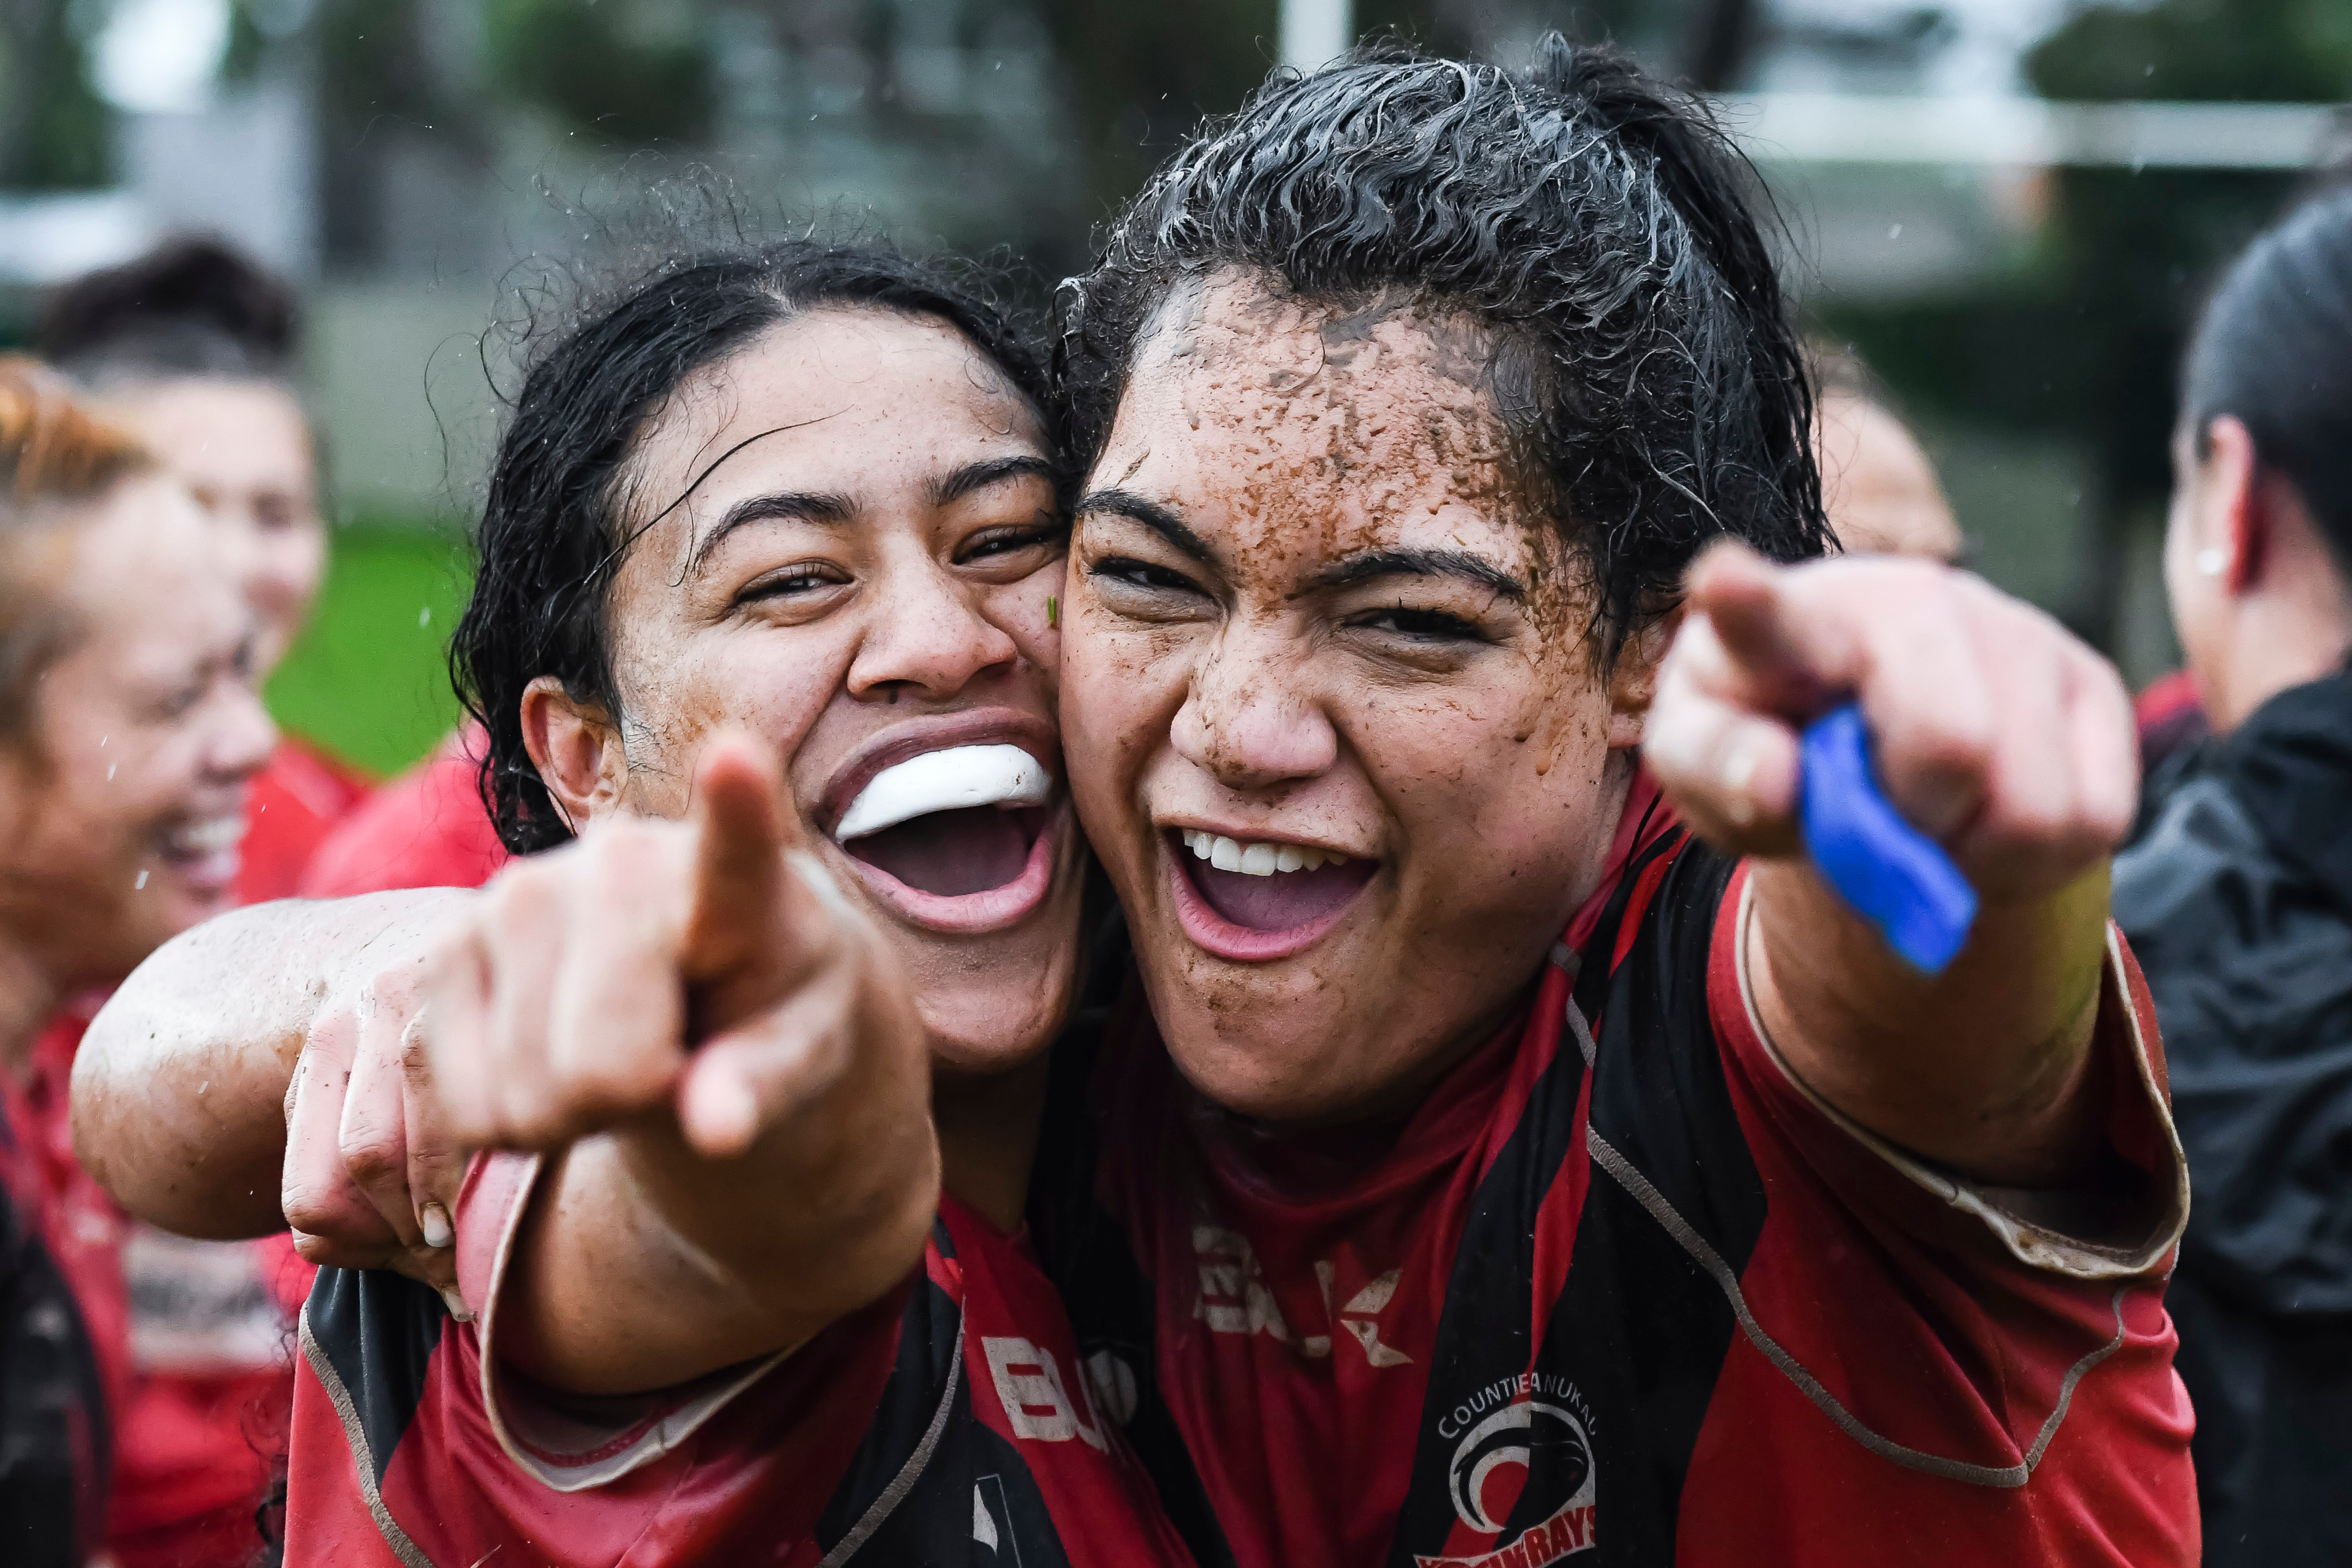 Two female rugby athletes cheer and point to camera